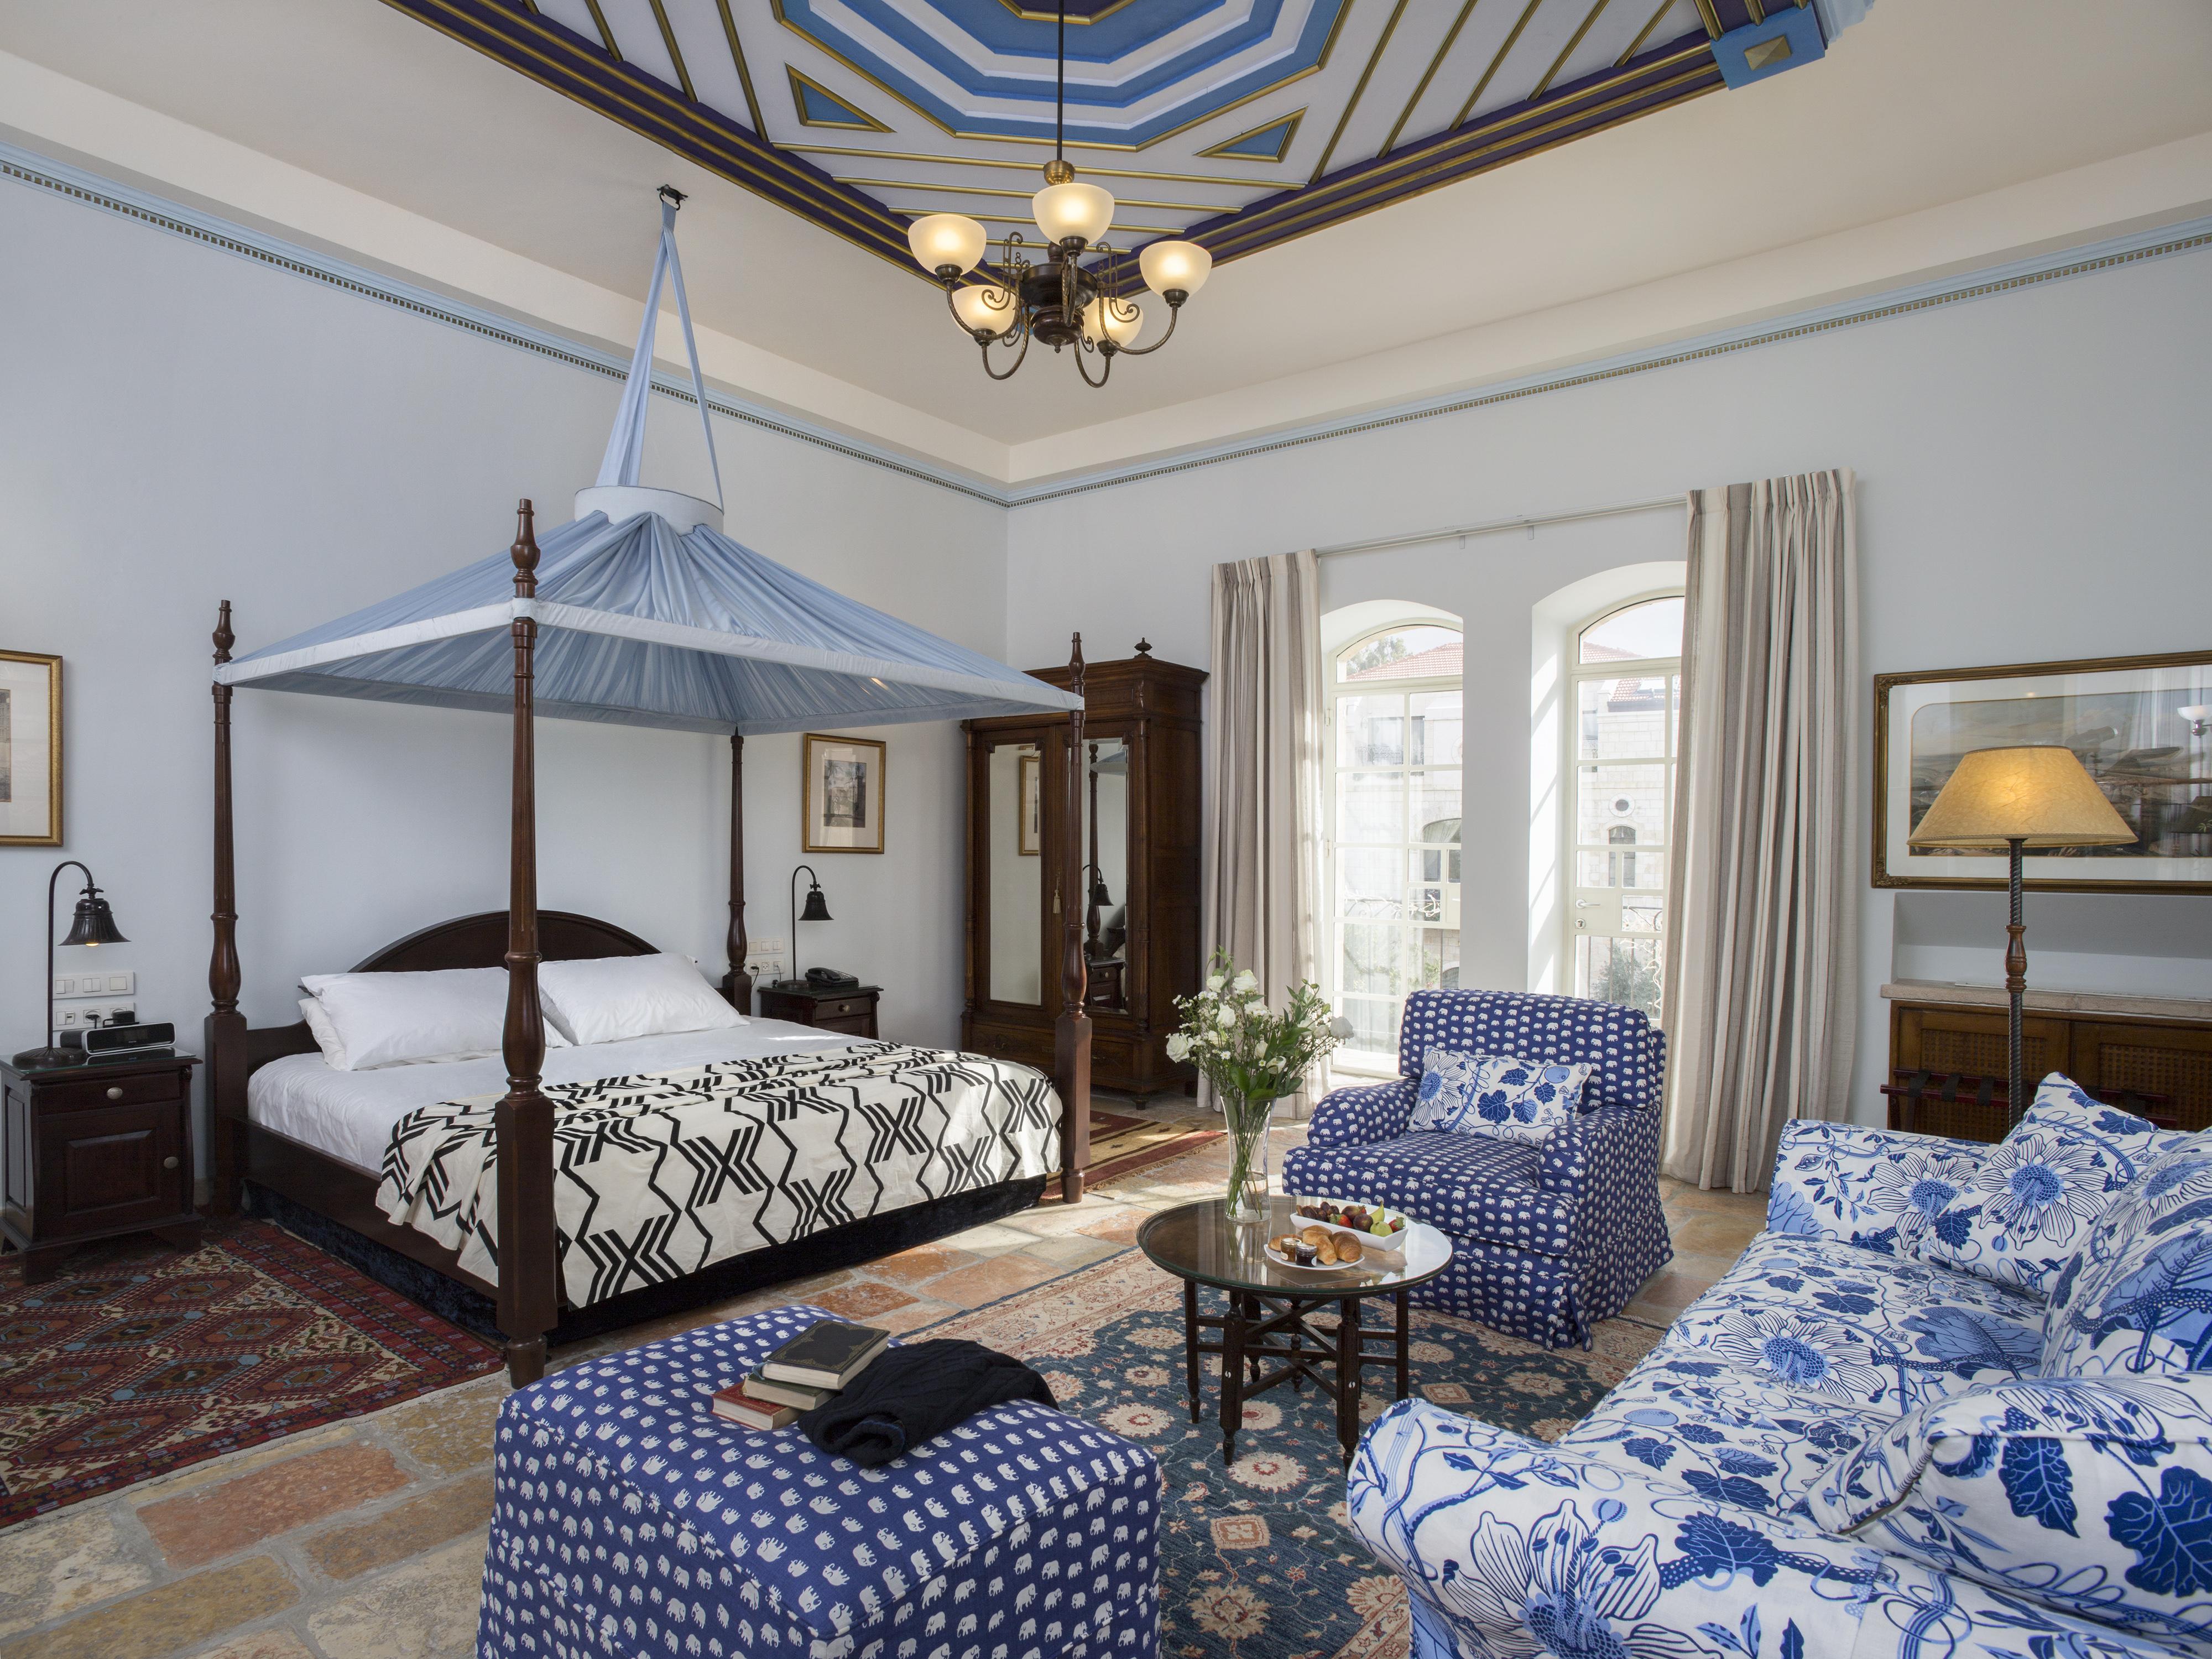 The American Colony Hotel - Small Luxury Hotels Of The World Jerusalem Room photo